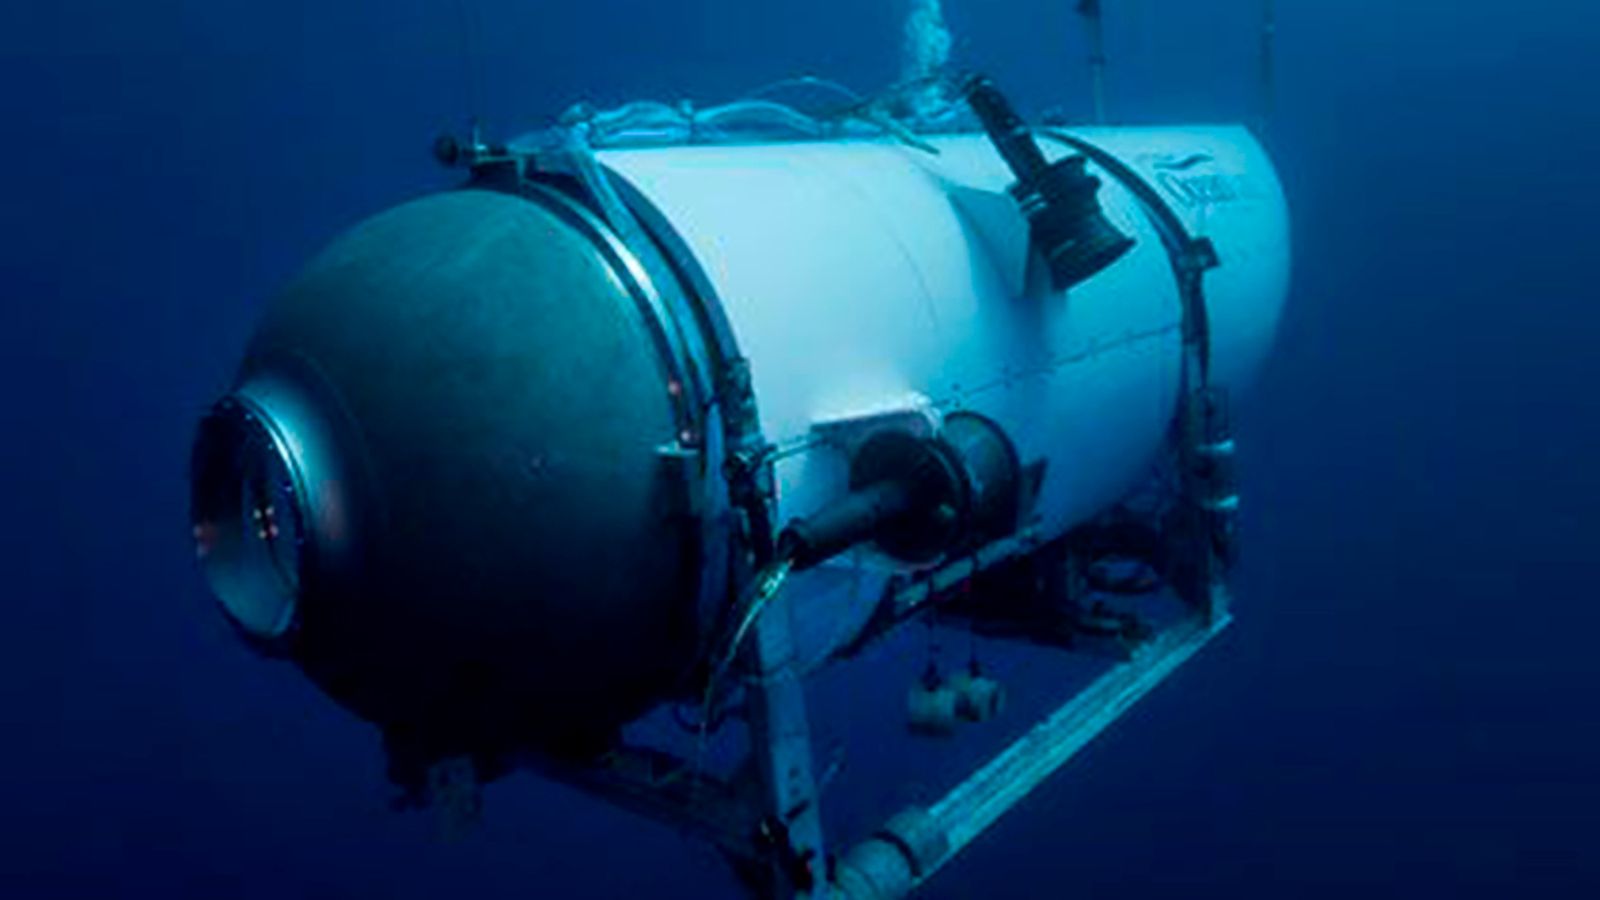 US Navy detected likely 'catastrophic implosion' of Titan sub soon after it went missing